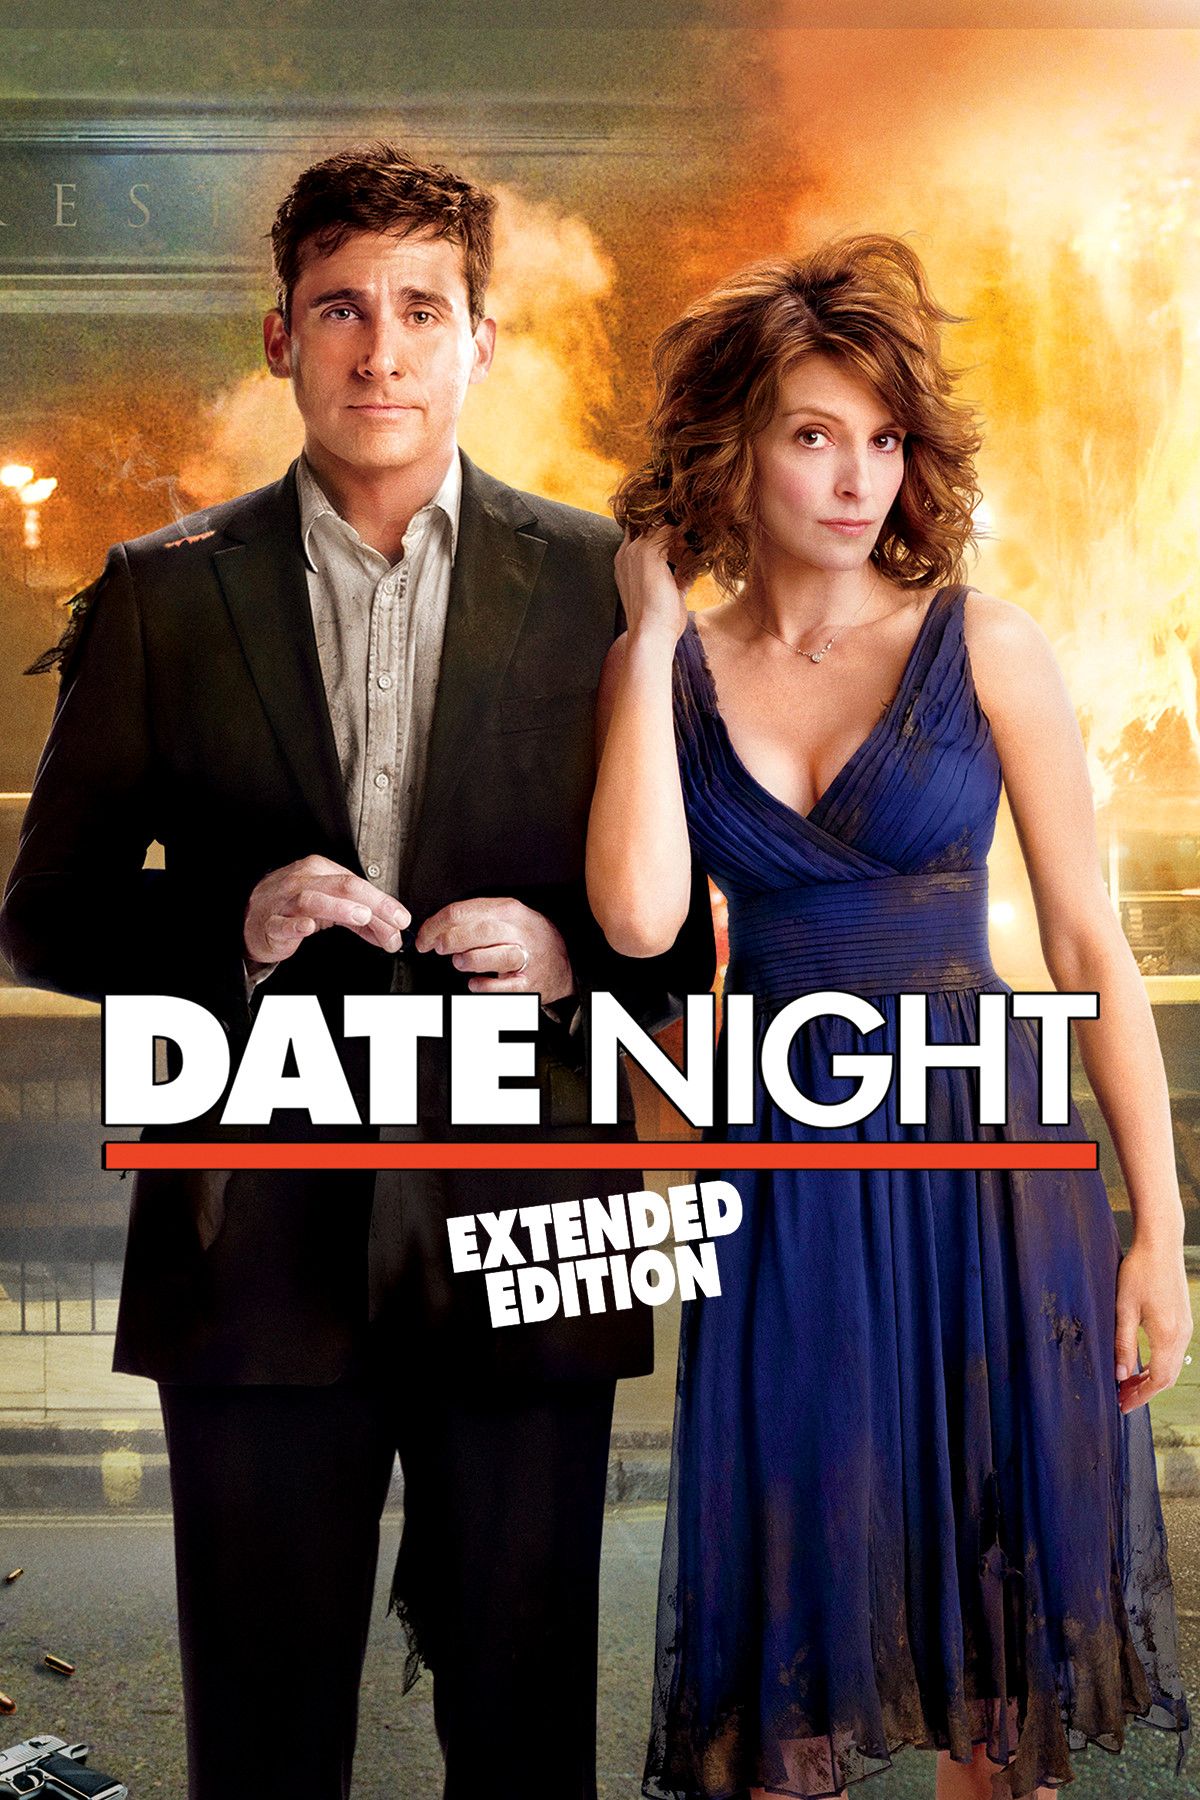 Date Night (Extended Edition), Full Movie